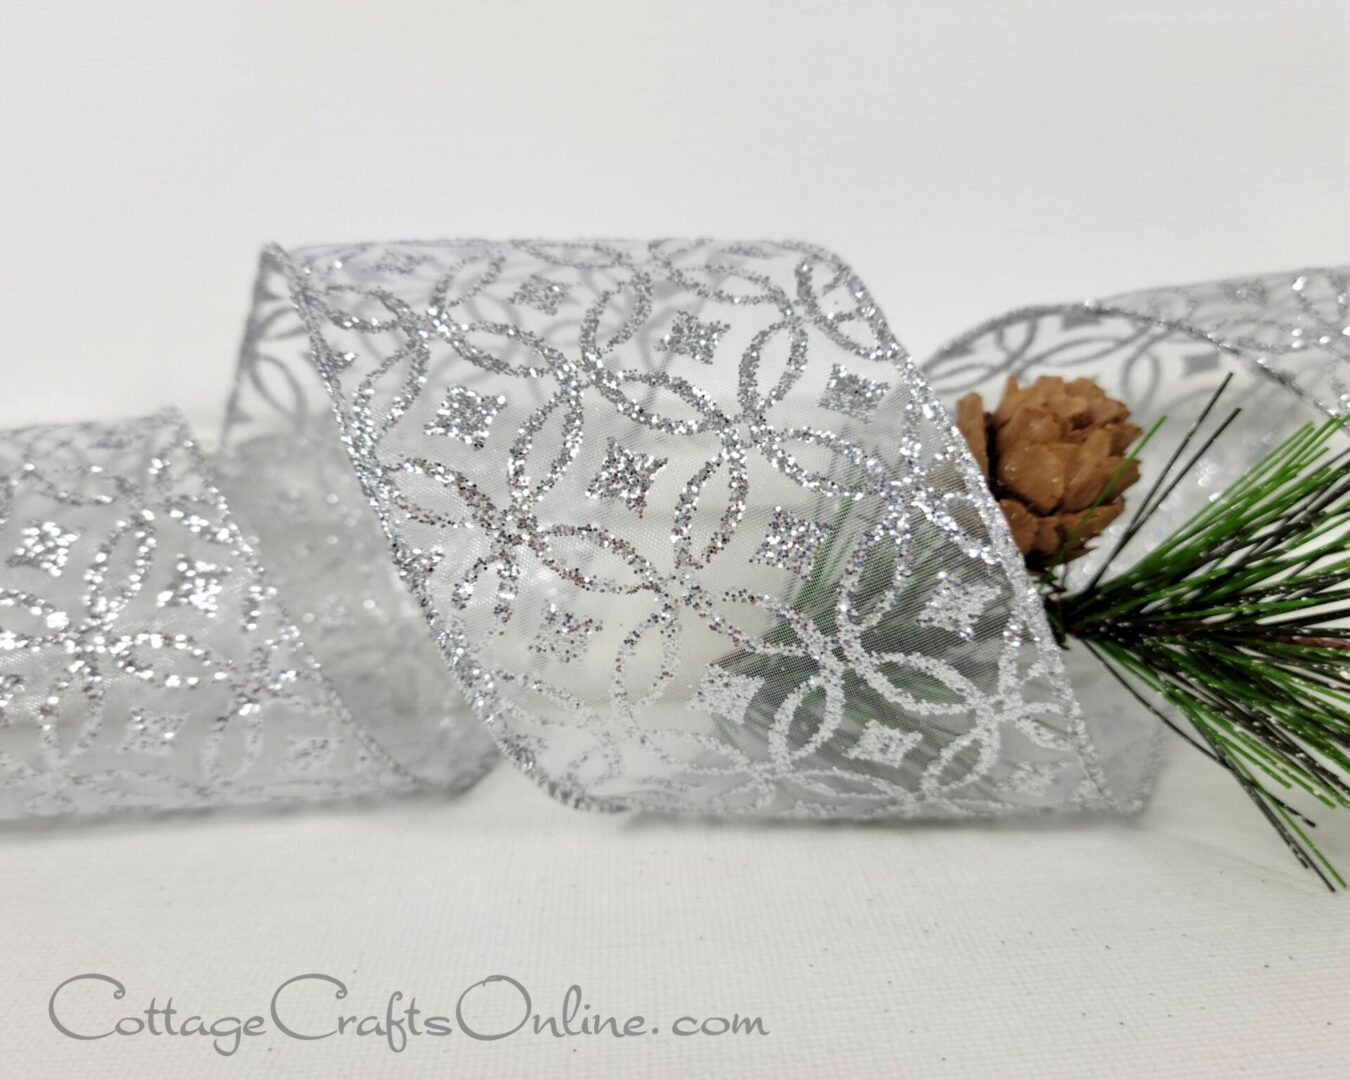 A close up of some silver bags with pine needles